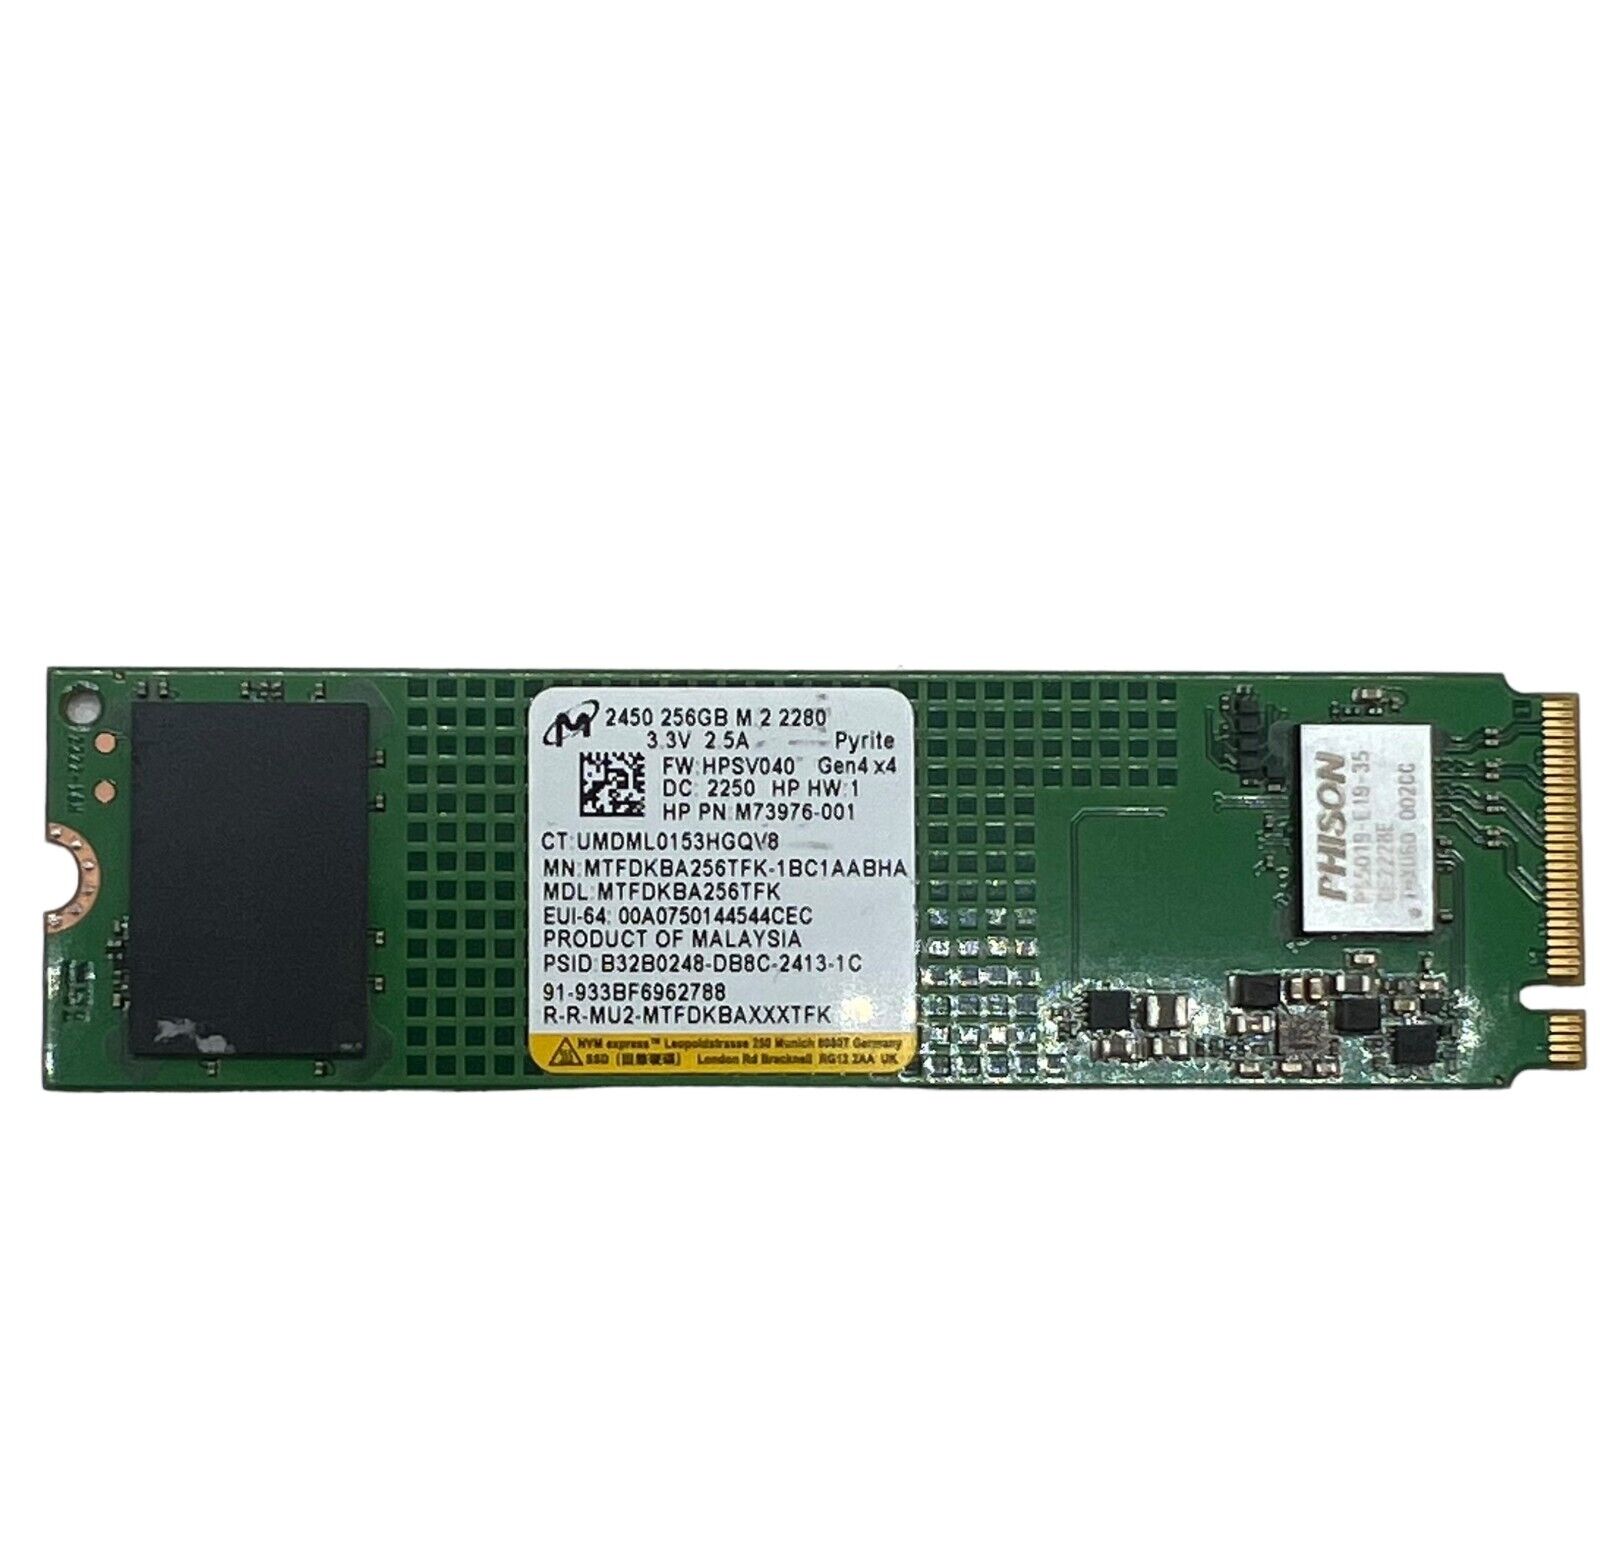 Micron 2450 256GB NVMe M.2 PCIe SSD Solid State Drive MTFDKBA256TFK